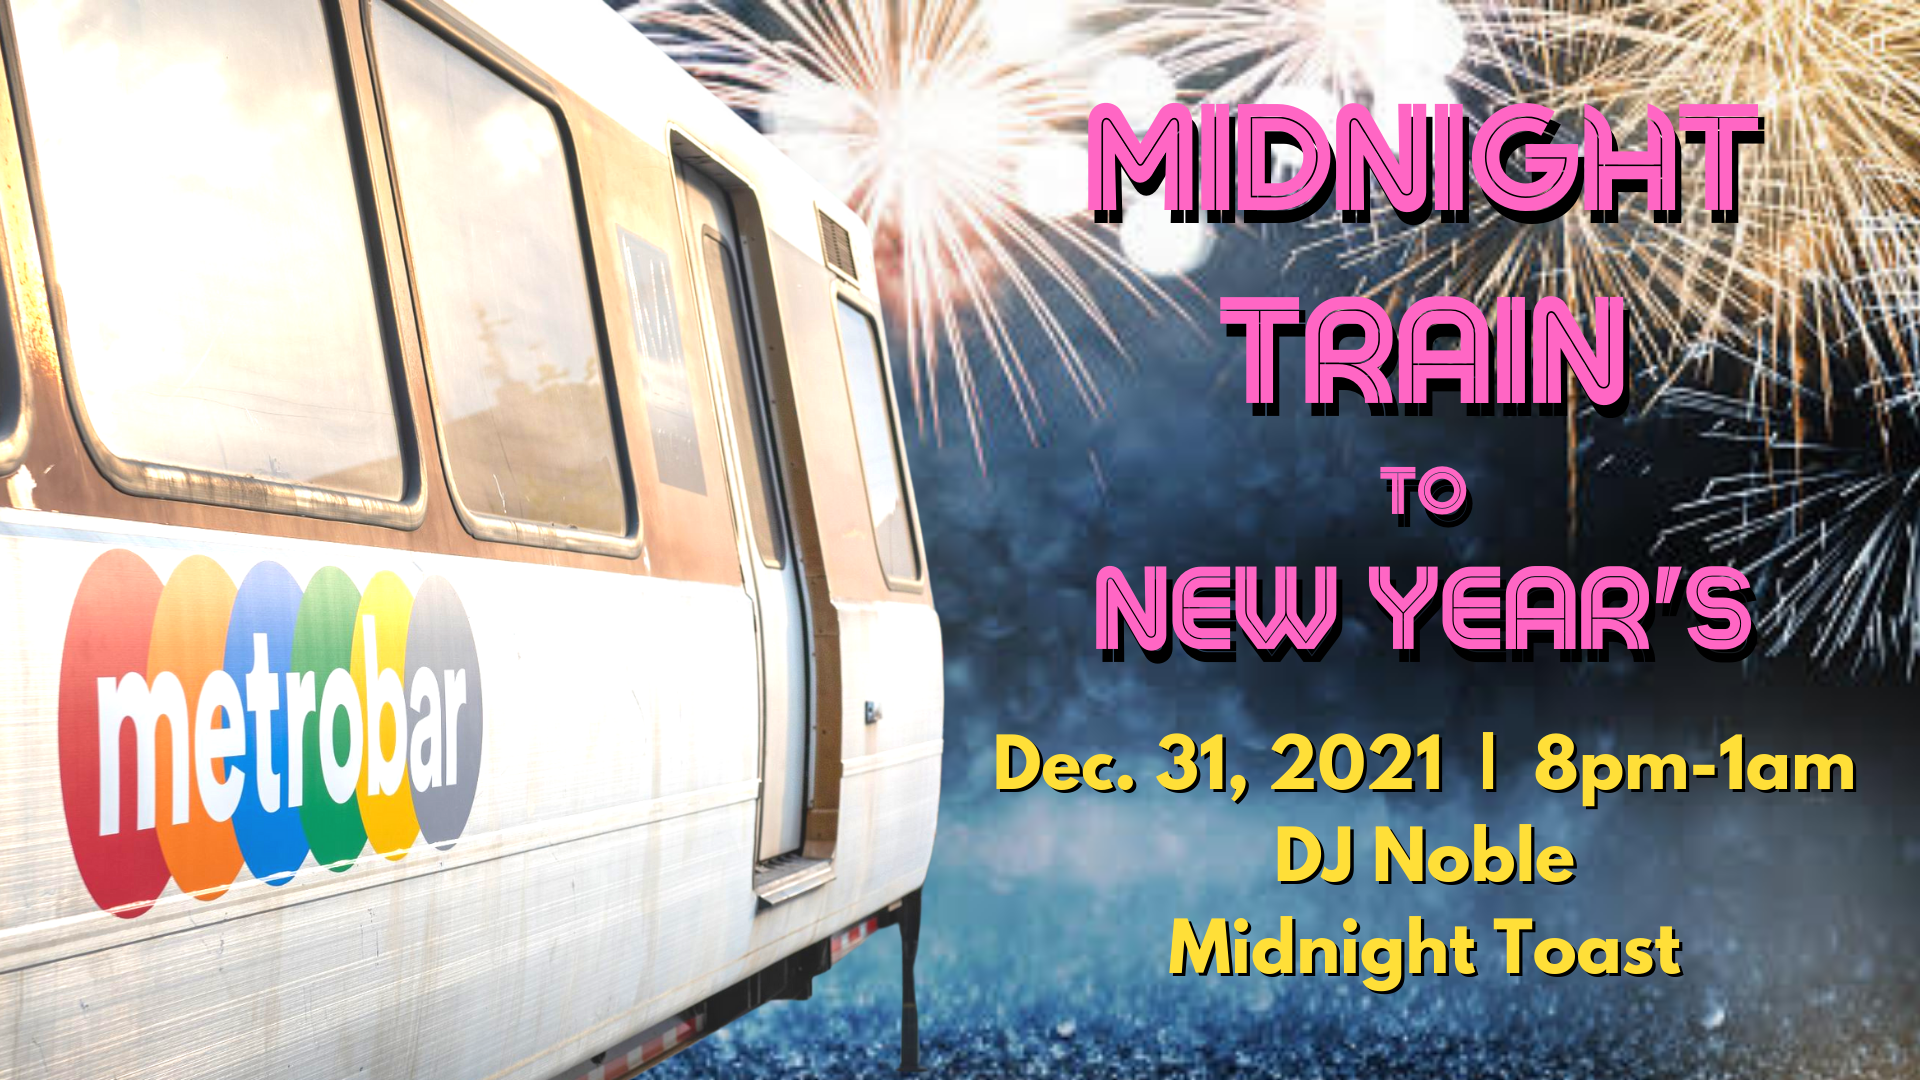 Midnight Train to New Year's Party